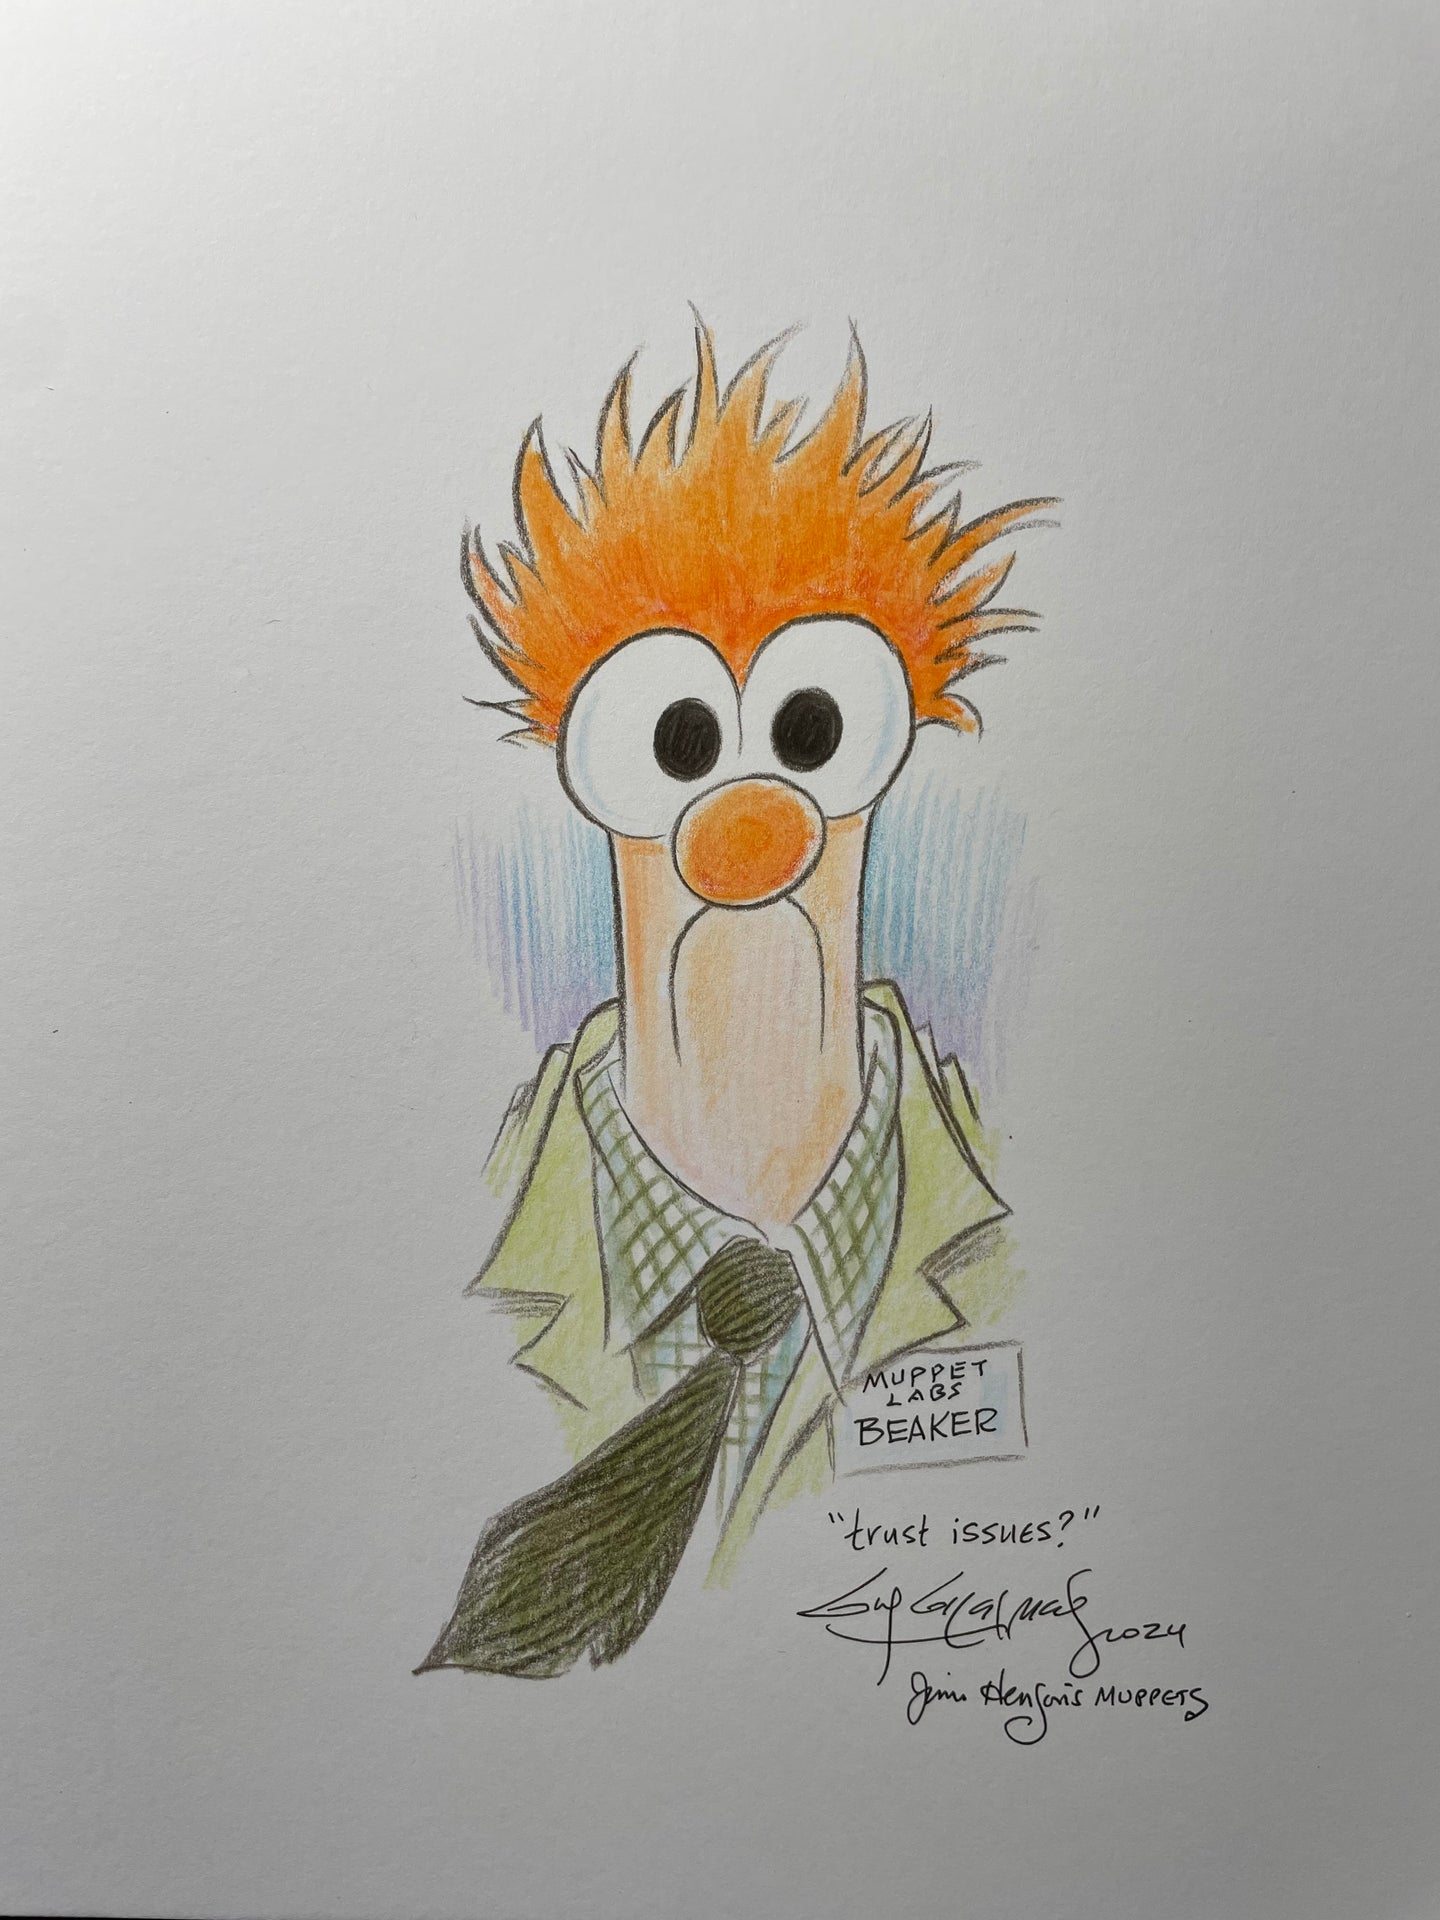 Beaker Trust Issues Original Art 8.5x11 Sketch  - Created by Guy Gilchrist